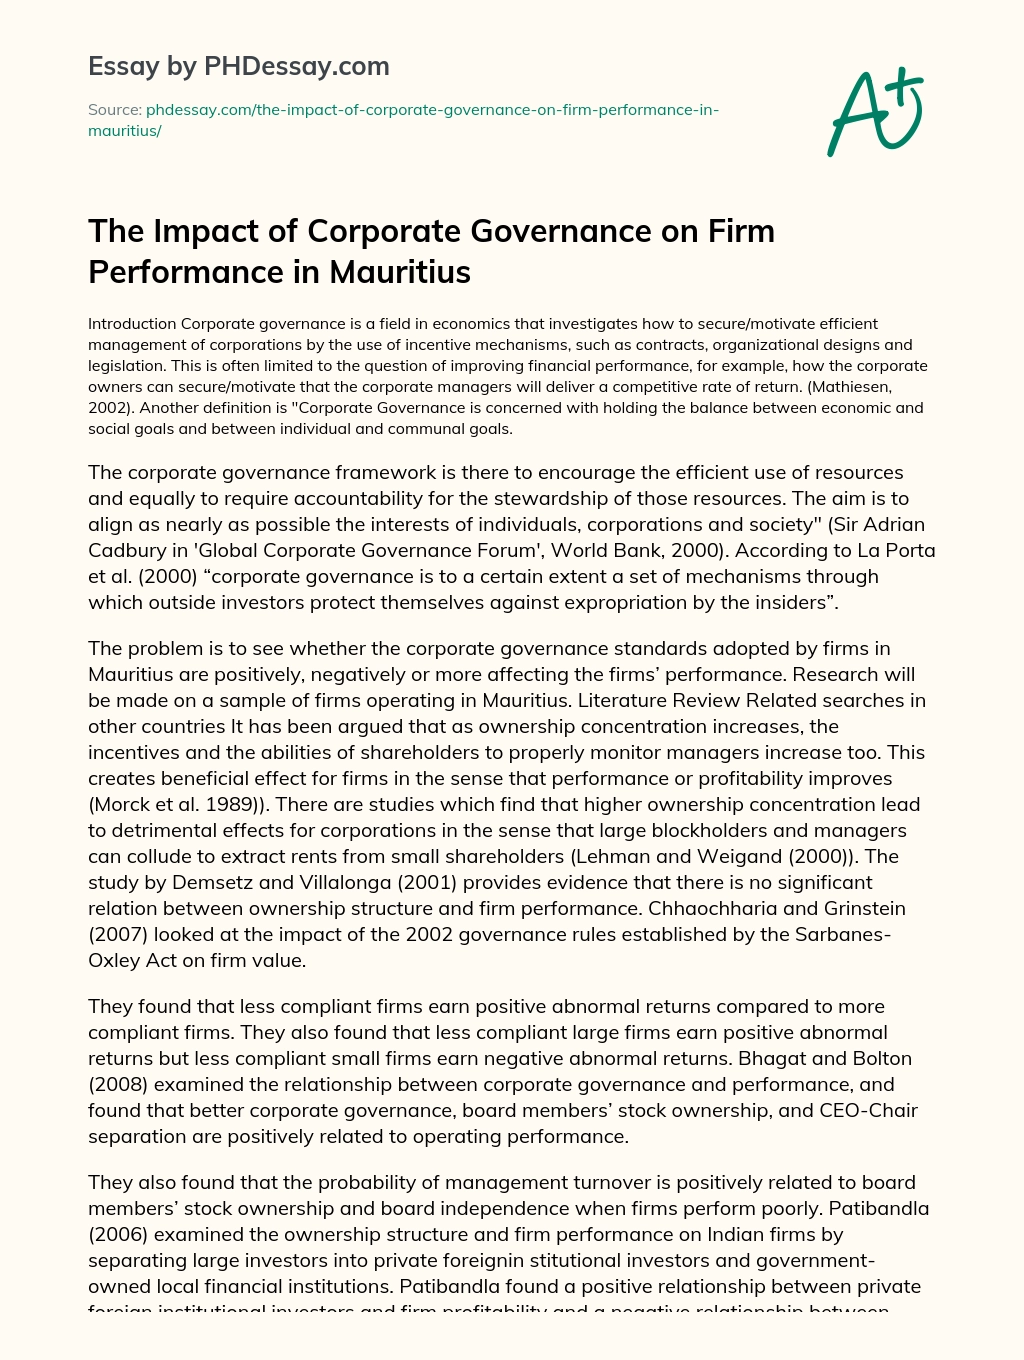 The Impact of Corporate Governance on Firm Performance in Mauritius essay